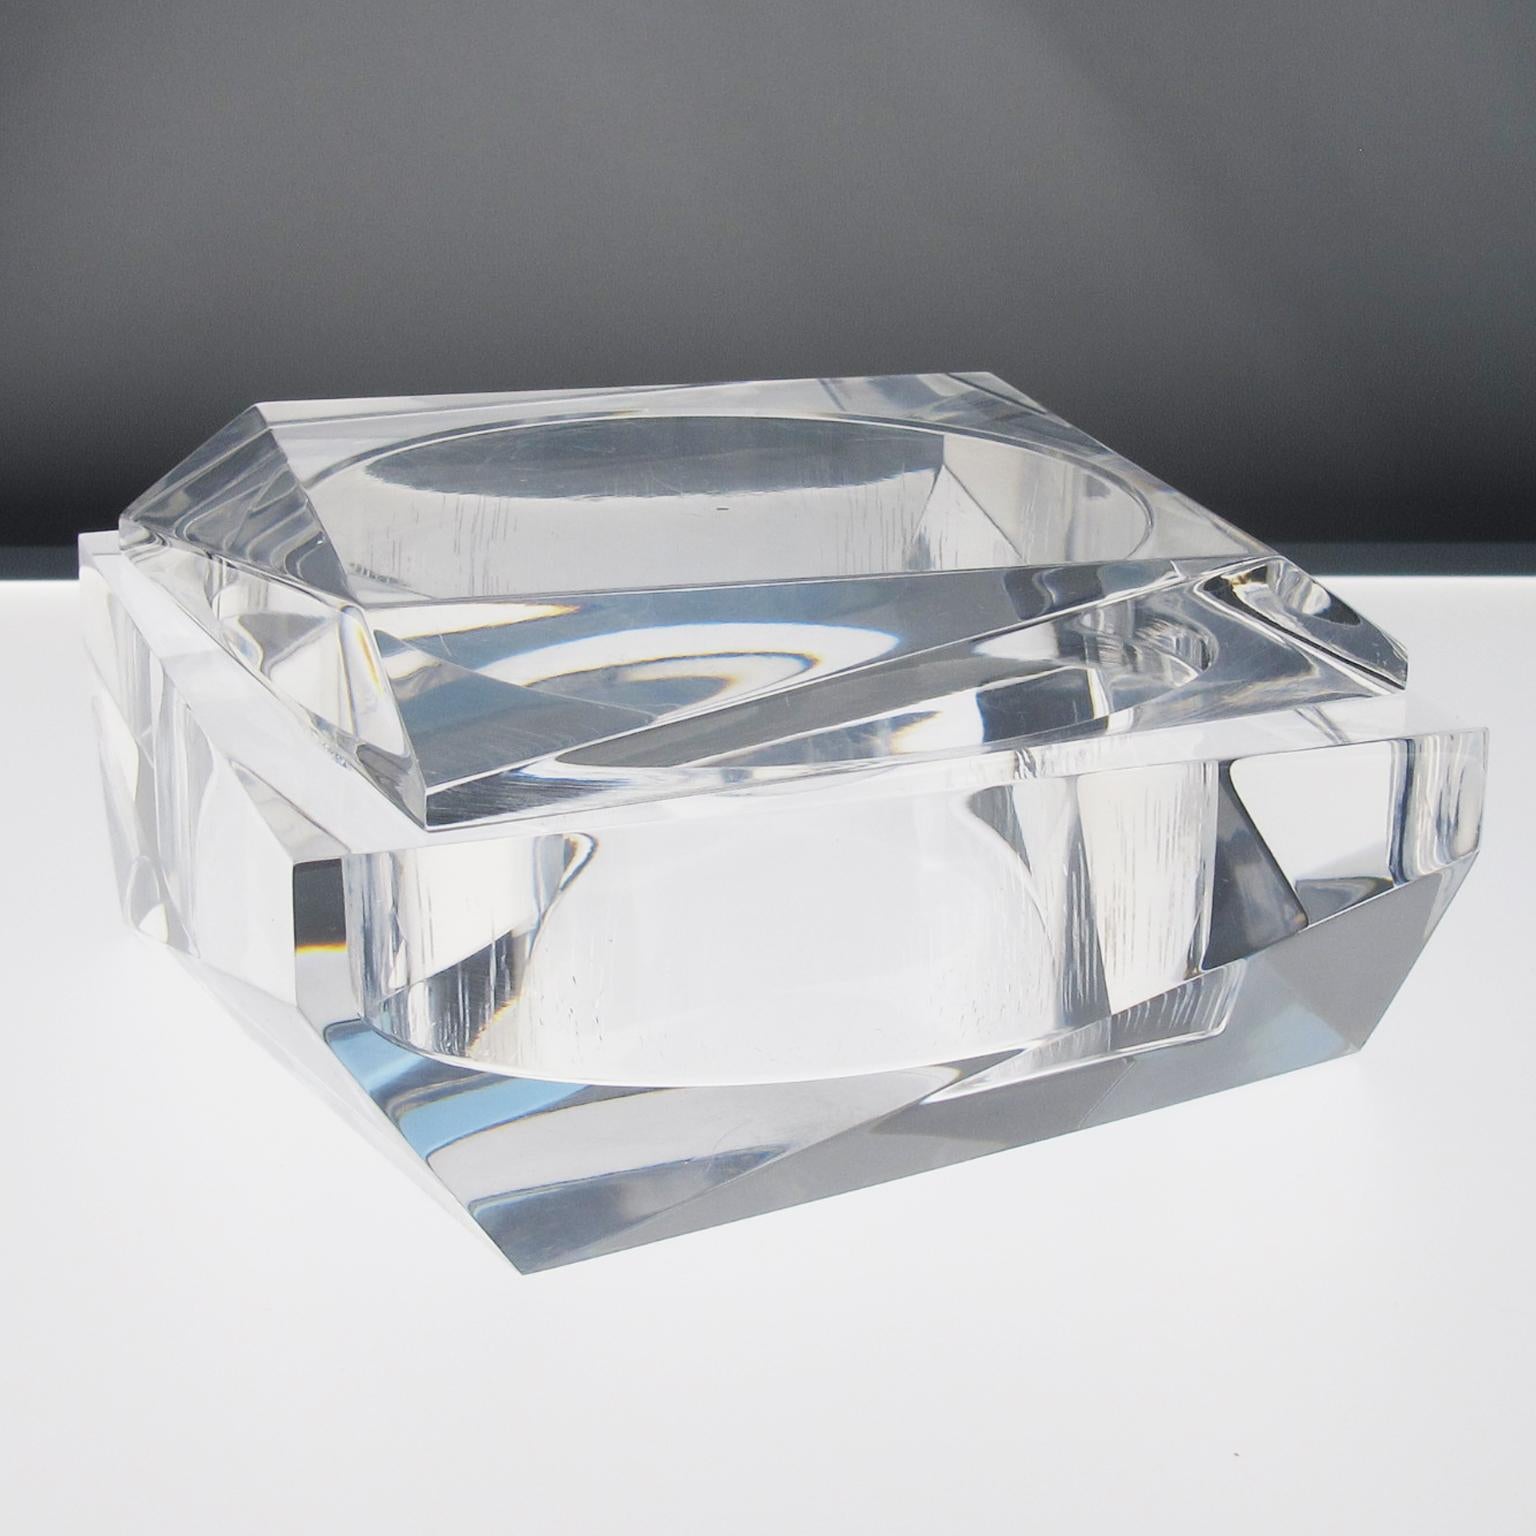 This stunning geometric Lucite decorative trinket-lidded box, made in the 1960s, features a modernist shape with an incredible carved prismatic design. The box is made of crystal clear Lucite or Plexiglass with a thick material. It is marked